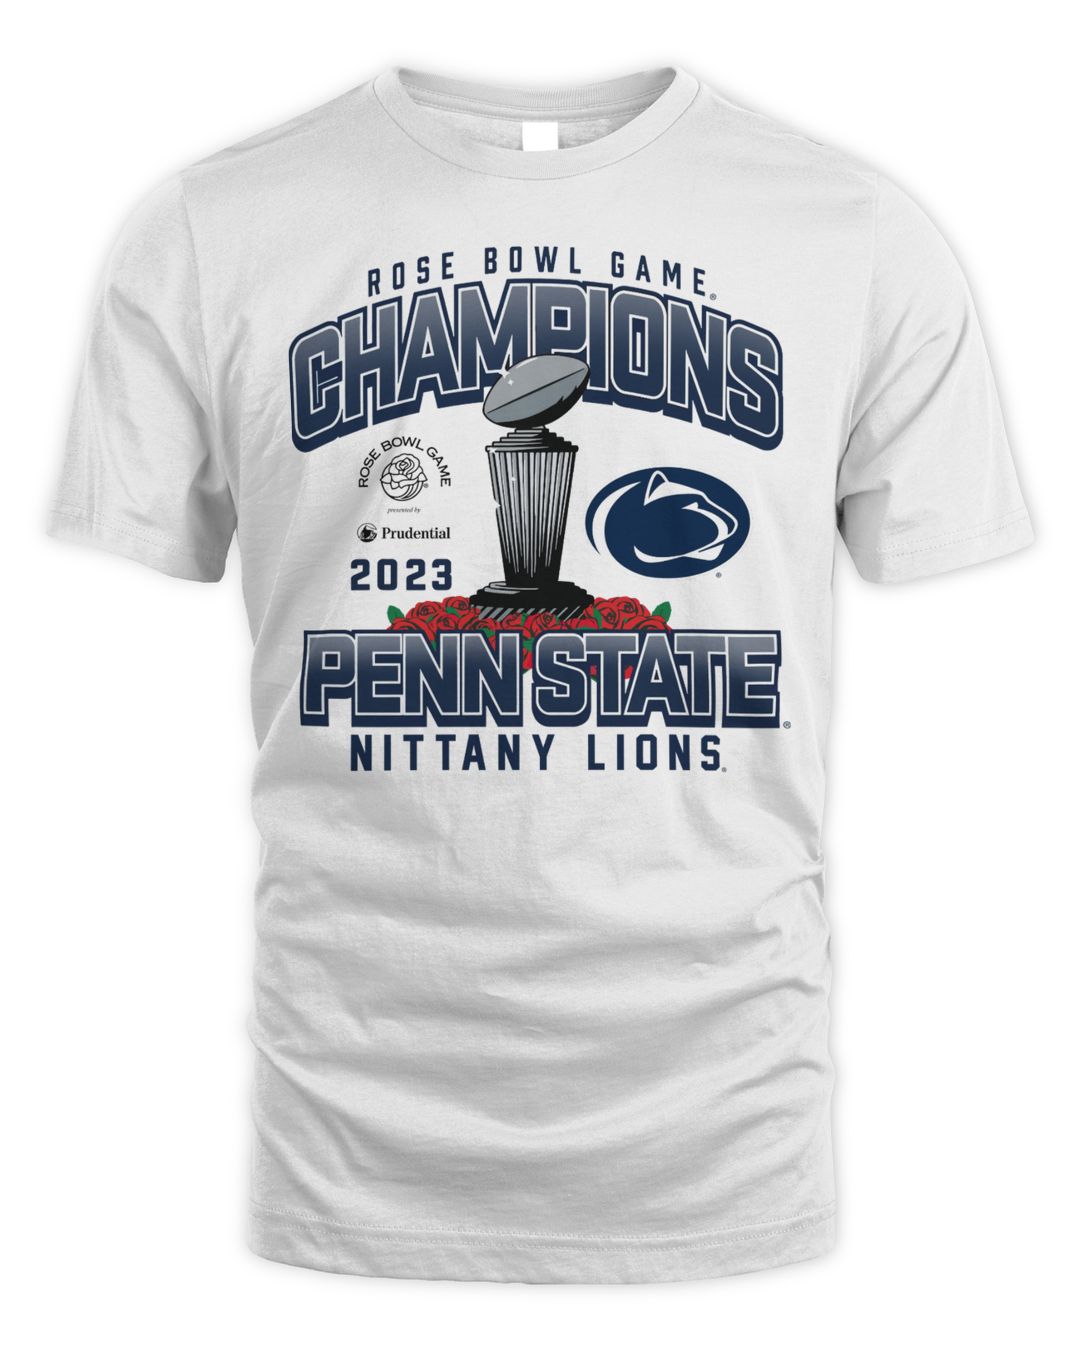 Penn State Rose Bowl Merchandise Nittany Lions 2023 Champions Hometown